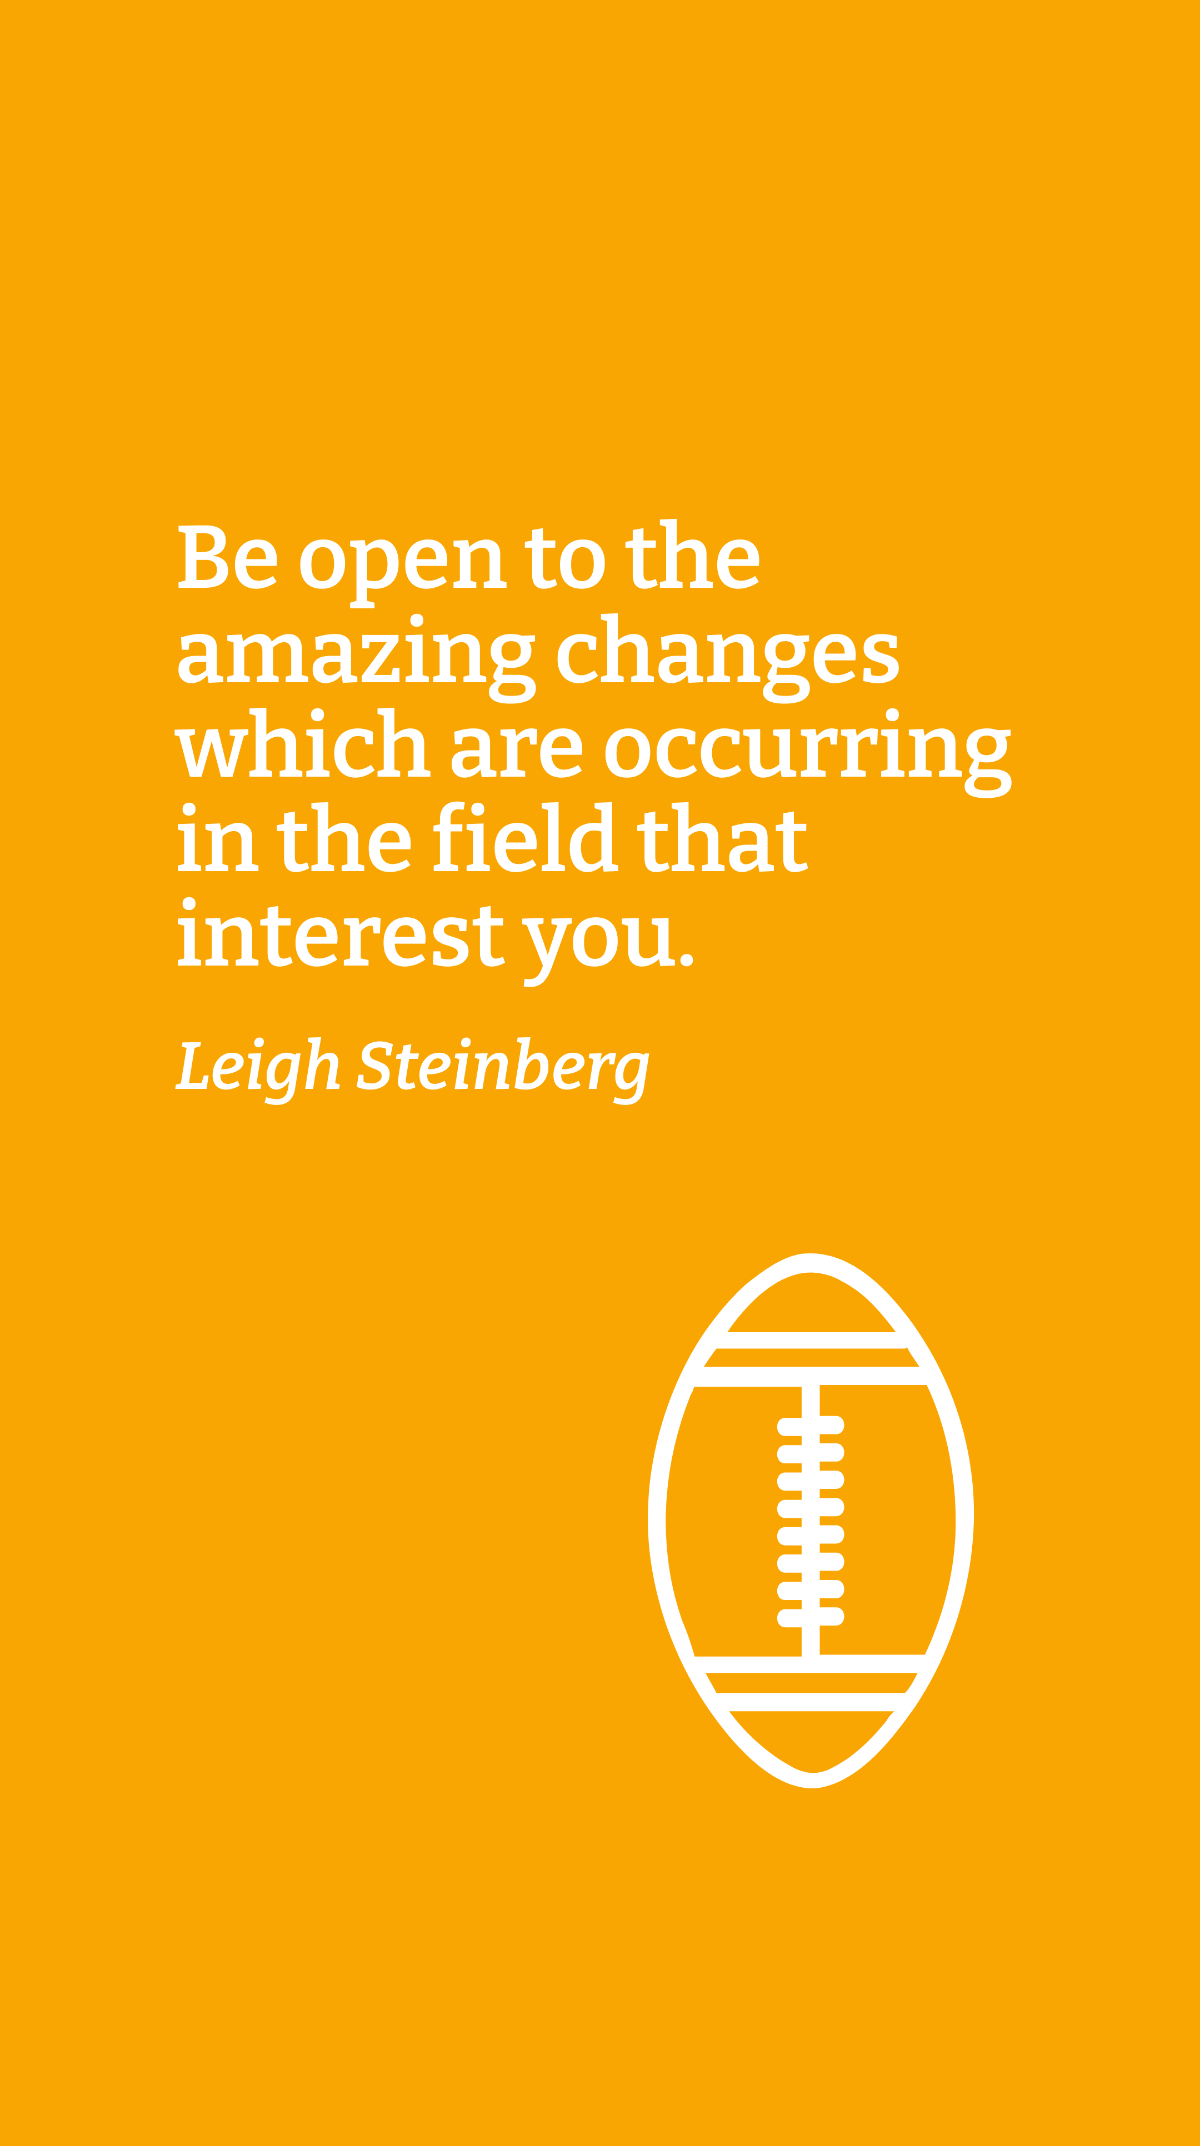 Free Leigh Steinberg - Be open to the amazing changes which are occurring in the field that interest you. Template